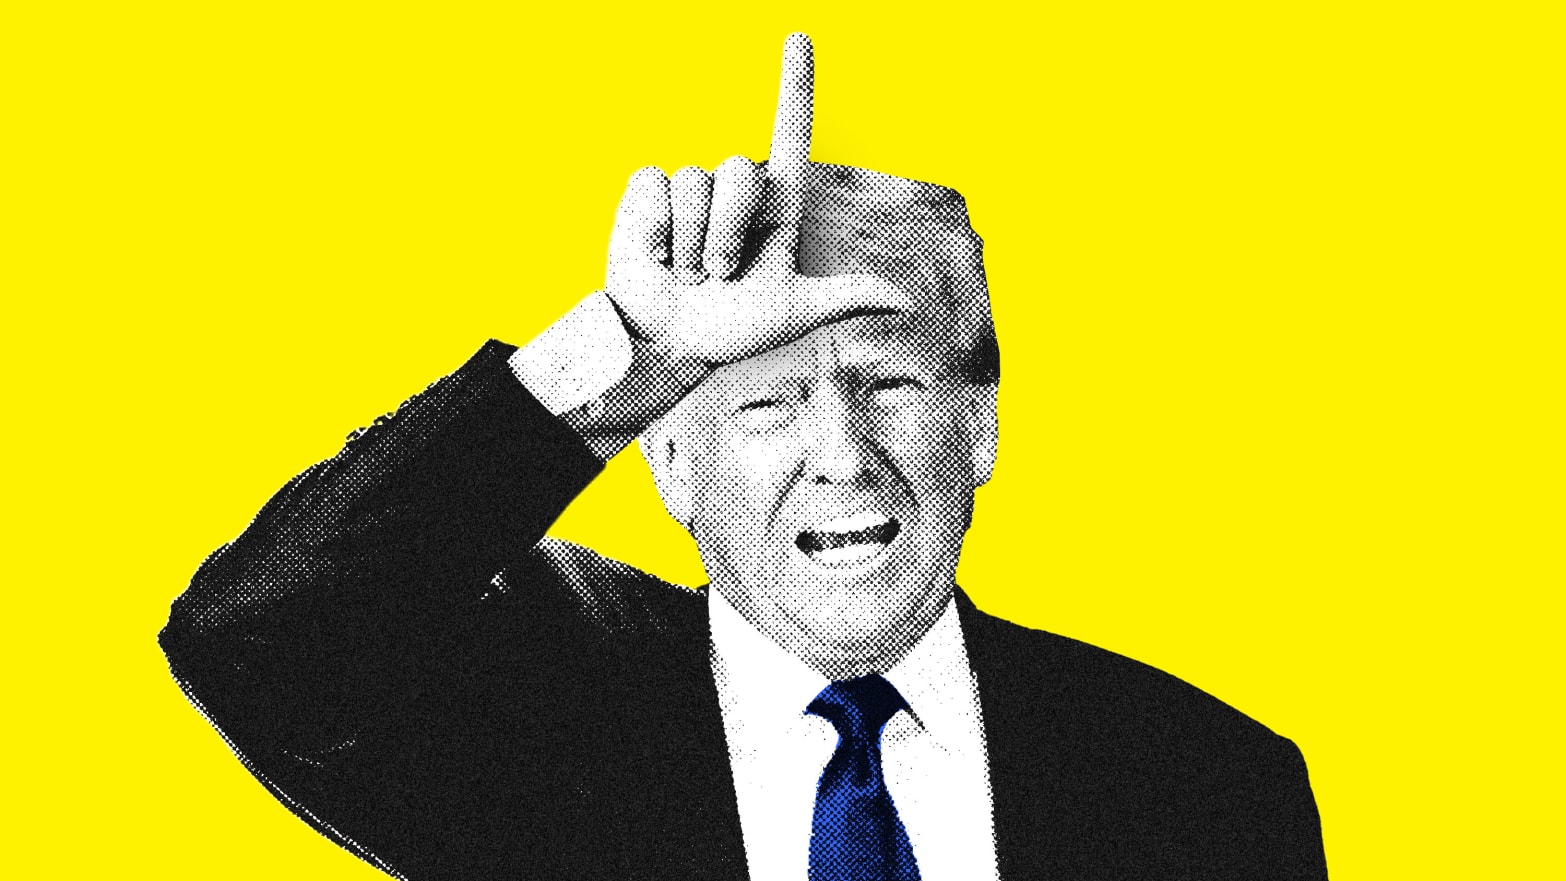 A photo illustration of Donald Trump making the L loser sign on his forehead